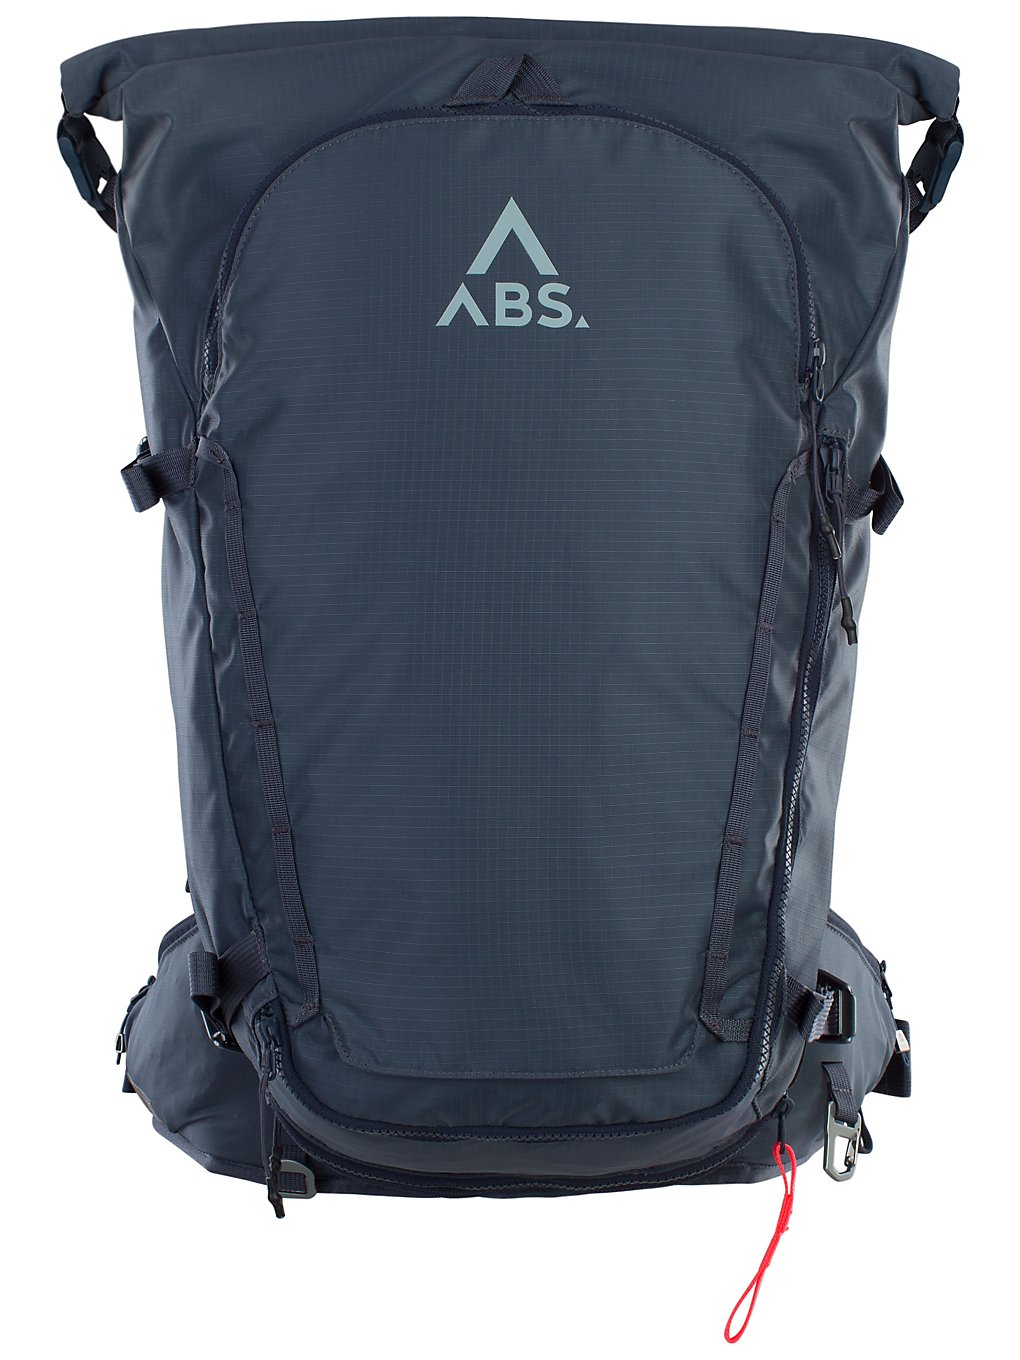 ABS A.Light Tour L without Cartridge 25-30L Backpack dusk